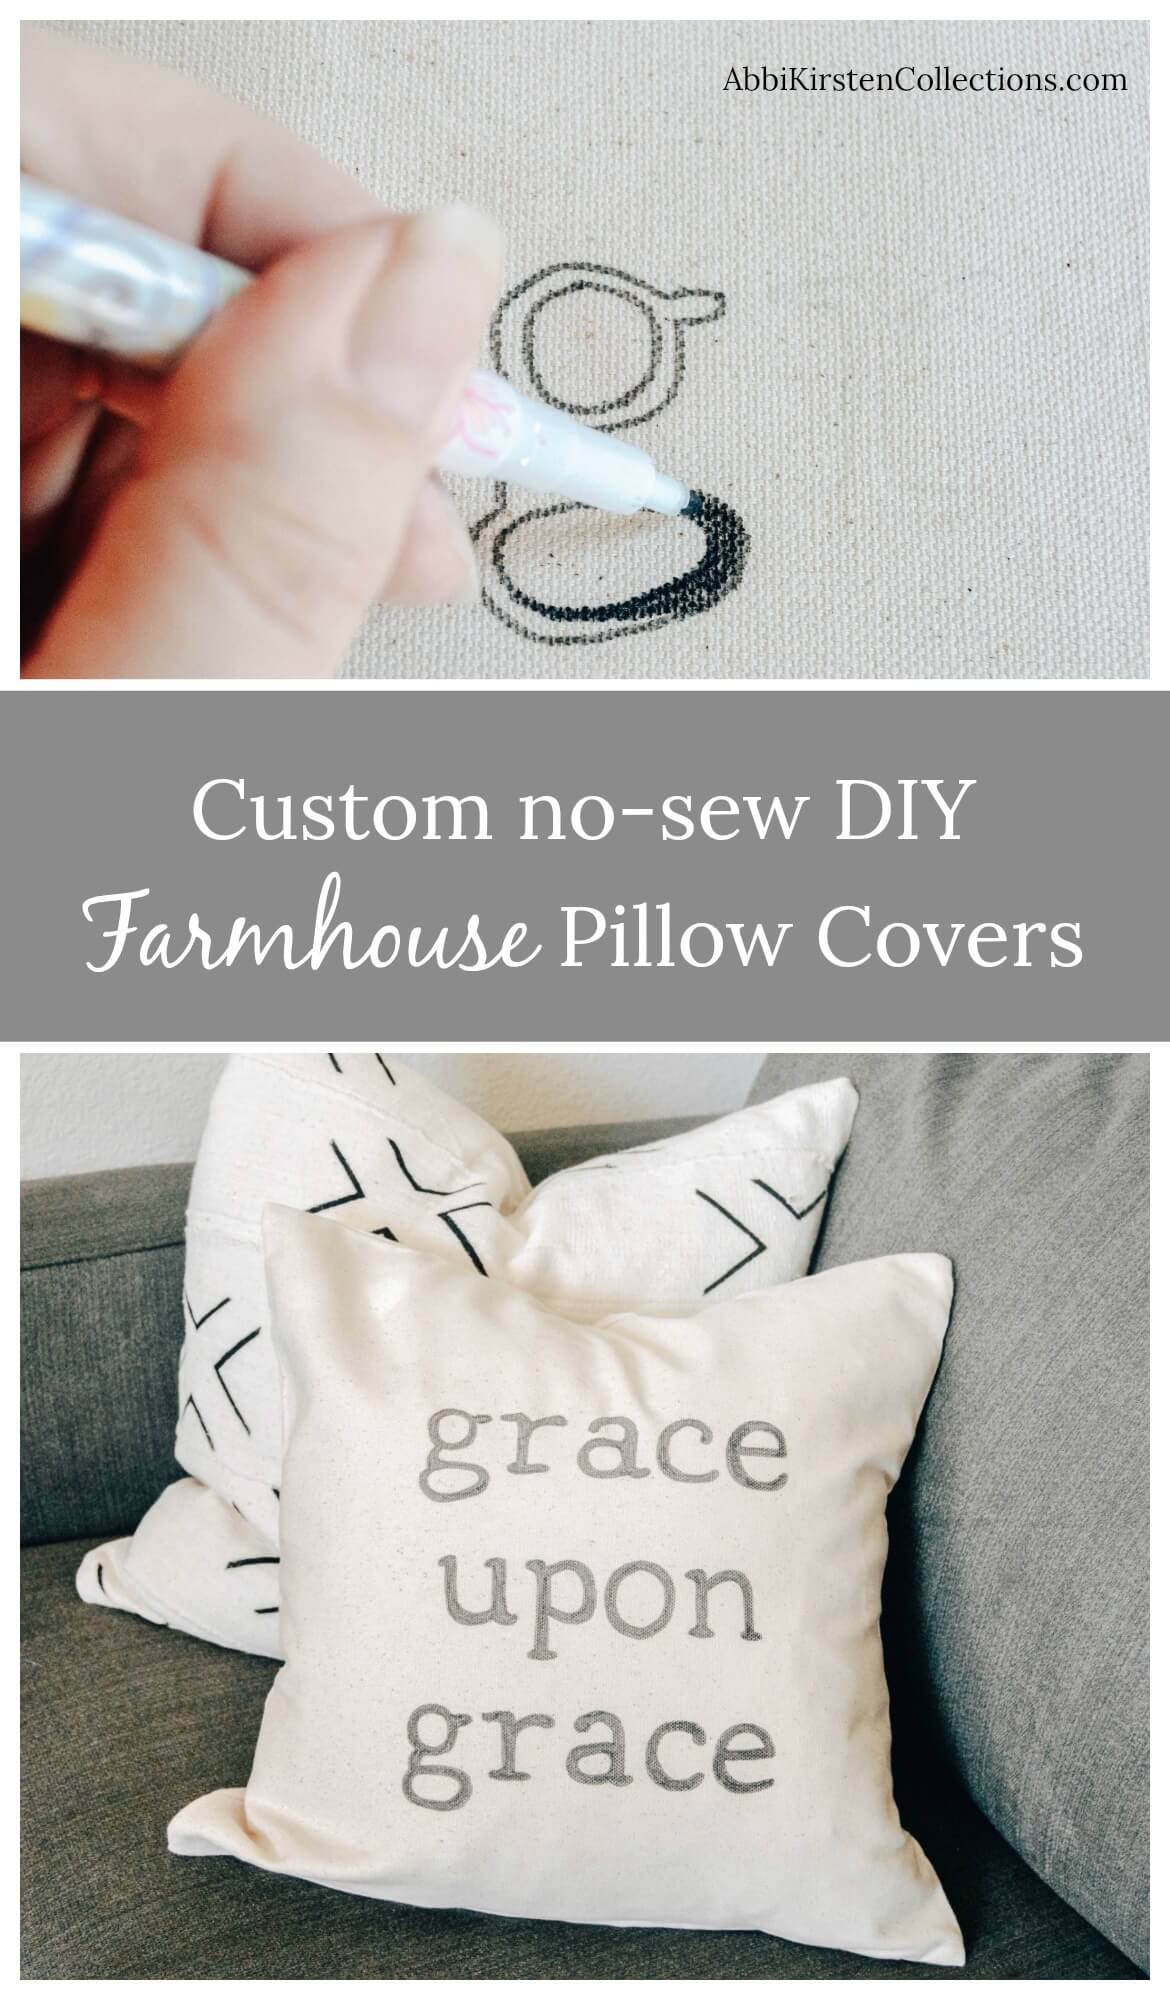 DIY Throw Pillow Covers. How to make your own DIY farmhouse pillow covers. Farmhouse pillow cover tutorial. Grace upon grace pillow cover.